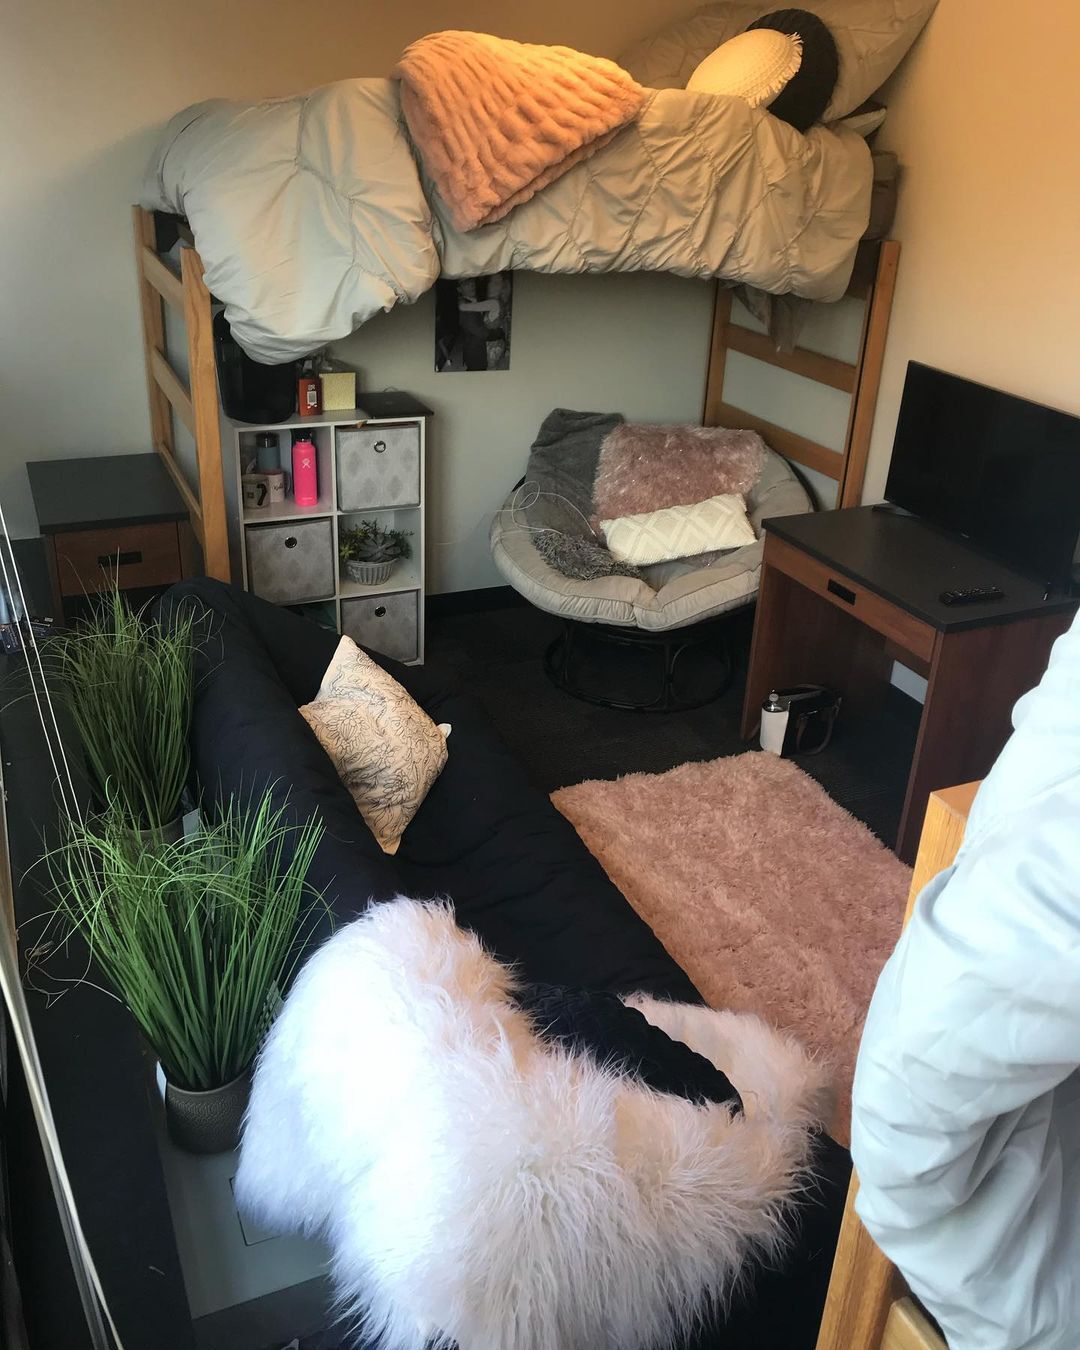 Interior dorm room showing beds, tables and decorations